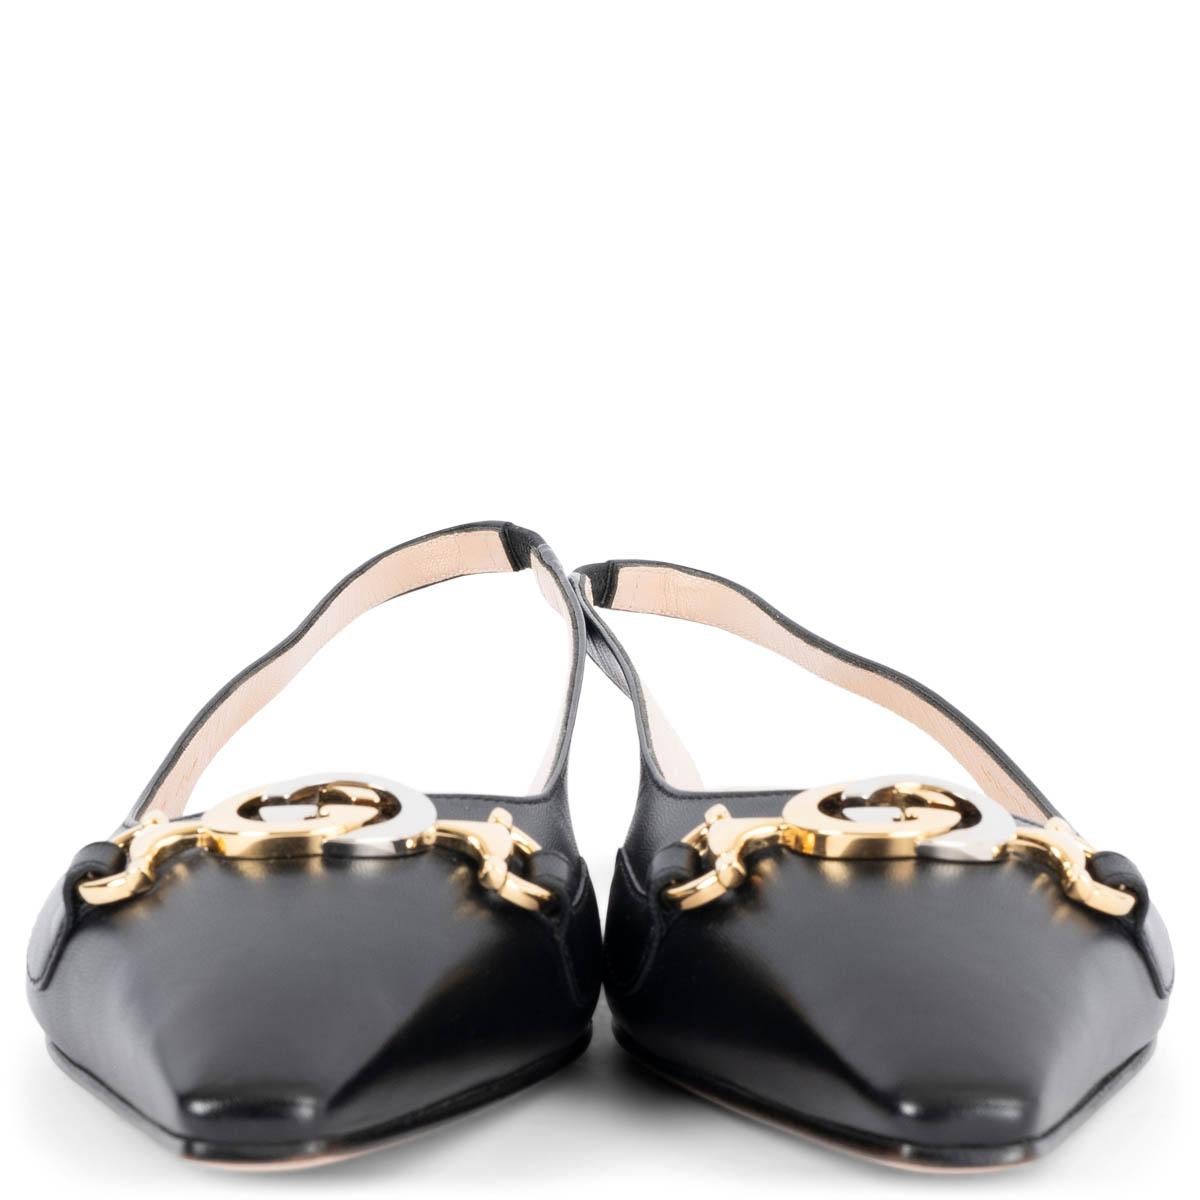 100% authentic Gucci Zumi pointed-toe slingbacks in black smooth calfskin decorated with the iconic Interlocking G horsebit detail in gold- and silver-tone metal. Brand new. Come with dust bags. 

Measurements
Imprinted Size	39
Shoe Size	39
Inside